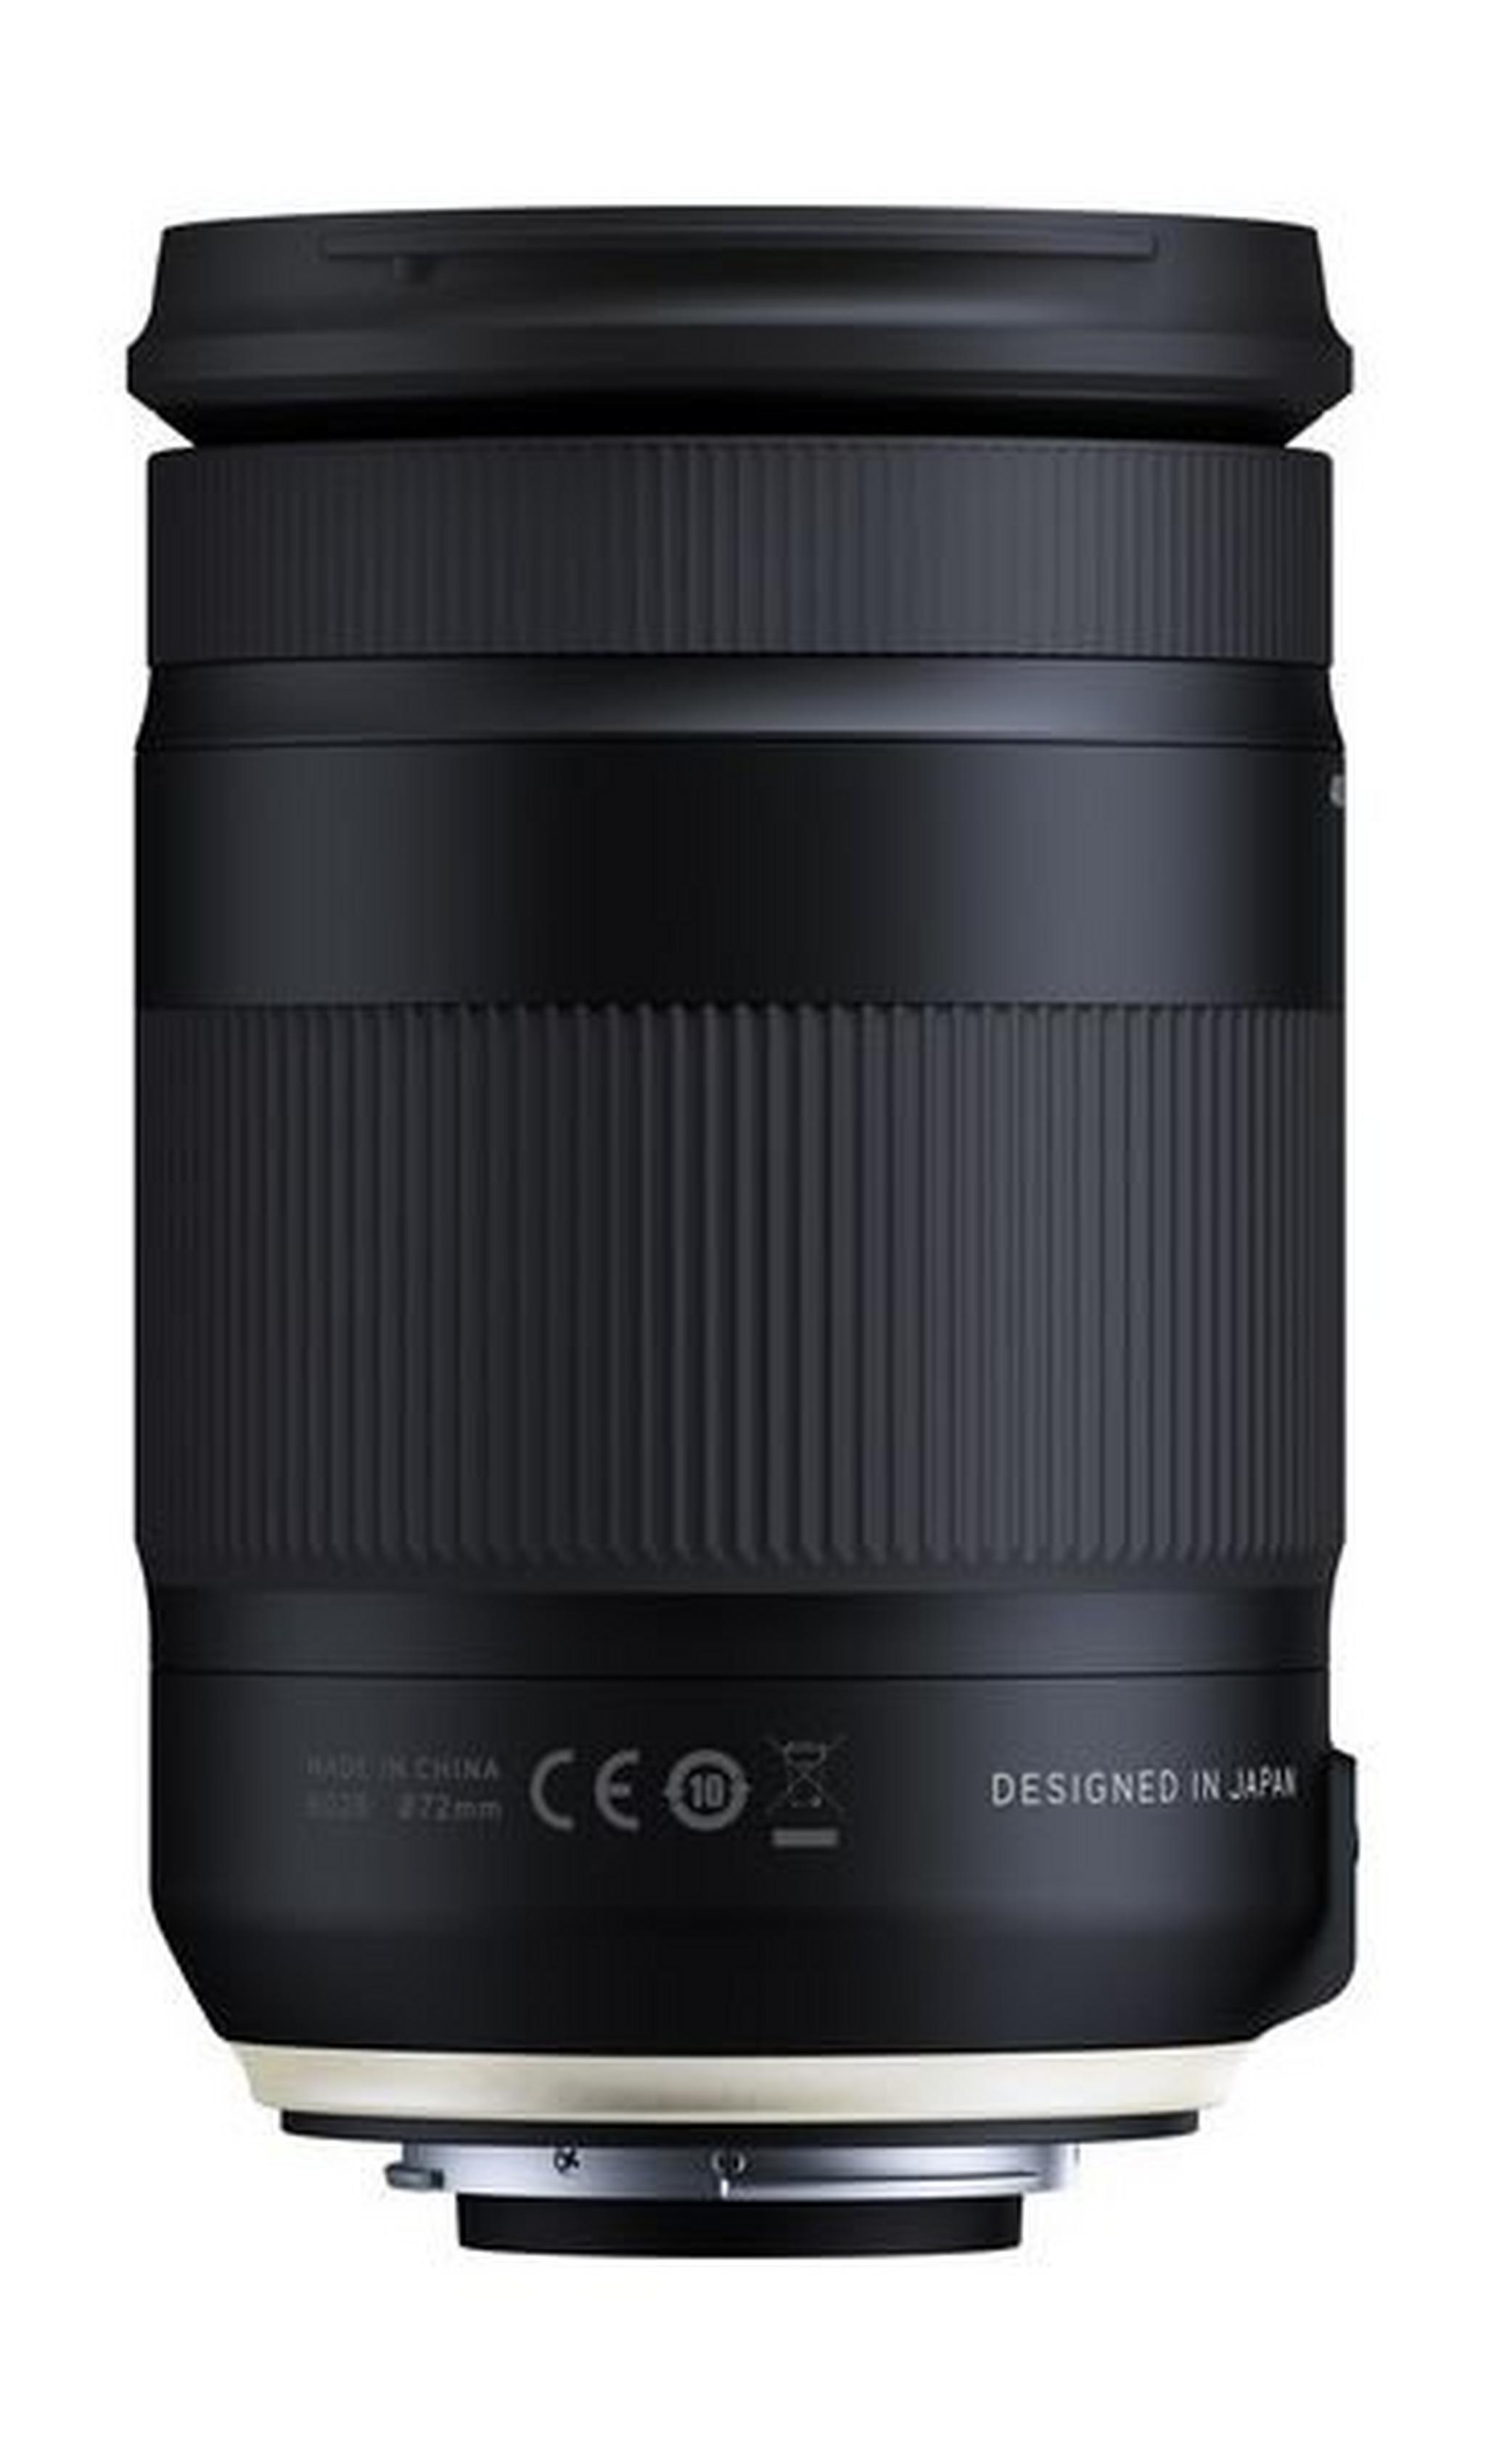 Tamron 18-400mm F/3.5-6.3 Di II VC HLD Lens for Canon